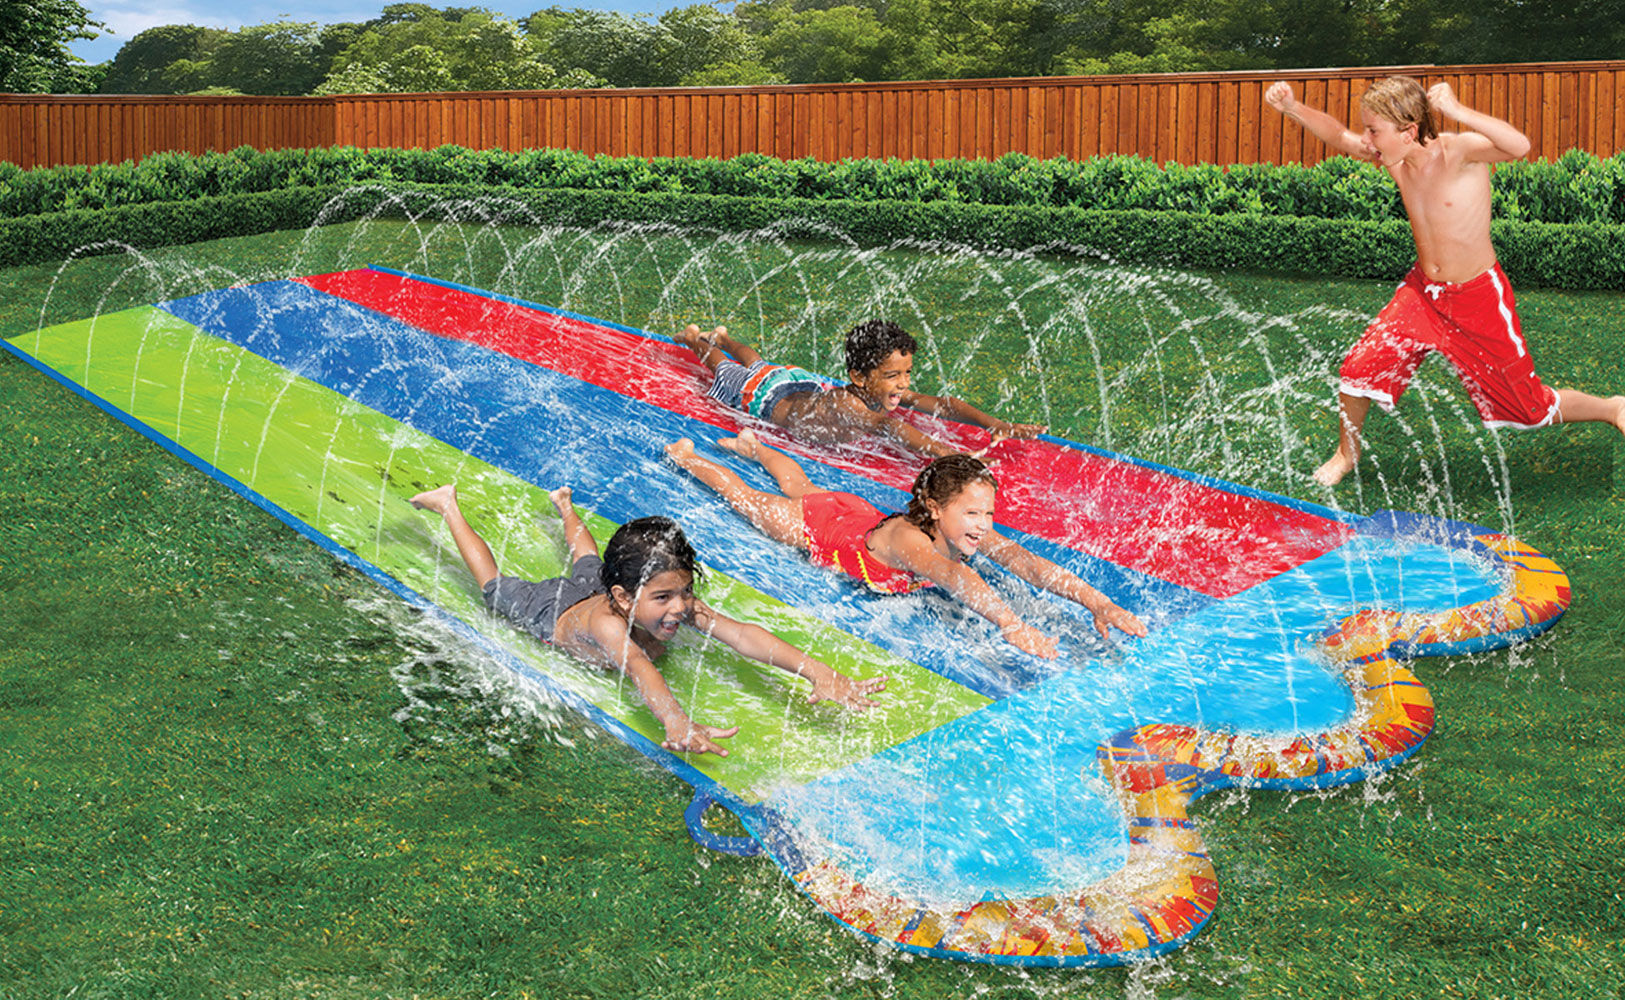 water slides Toys R Us appeals $20 million payout to Water slides, Inflatab...